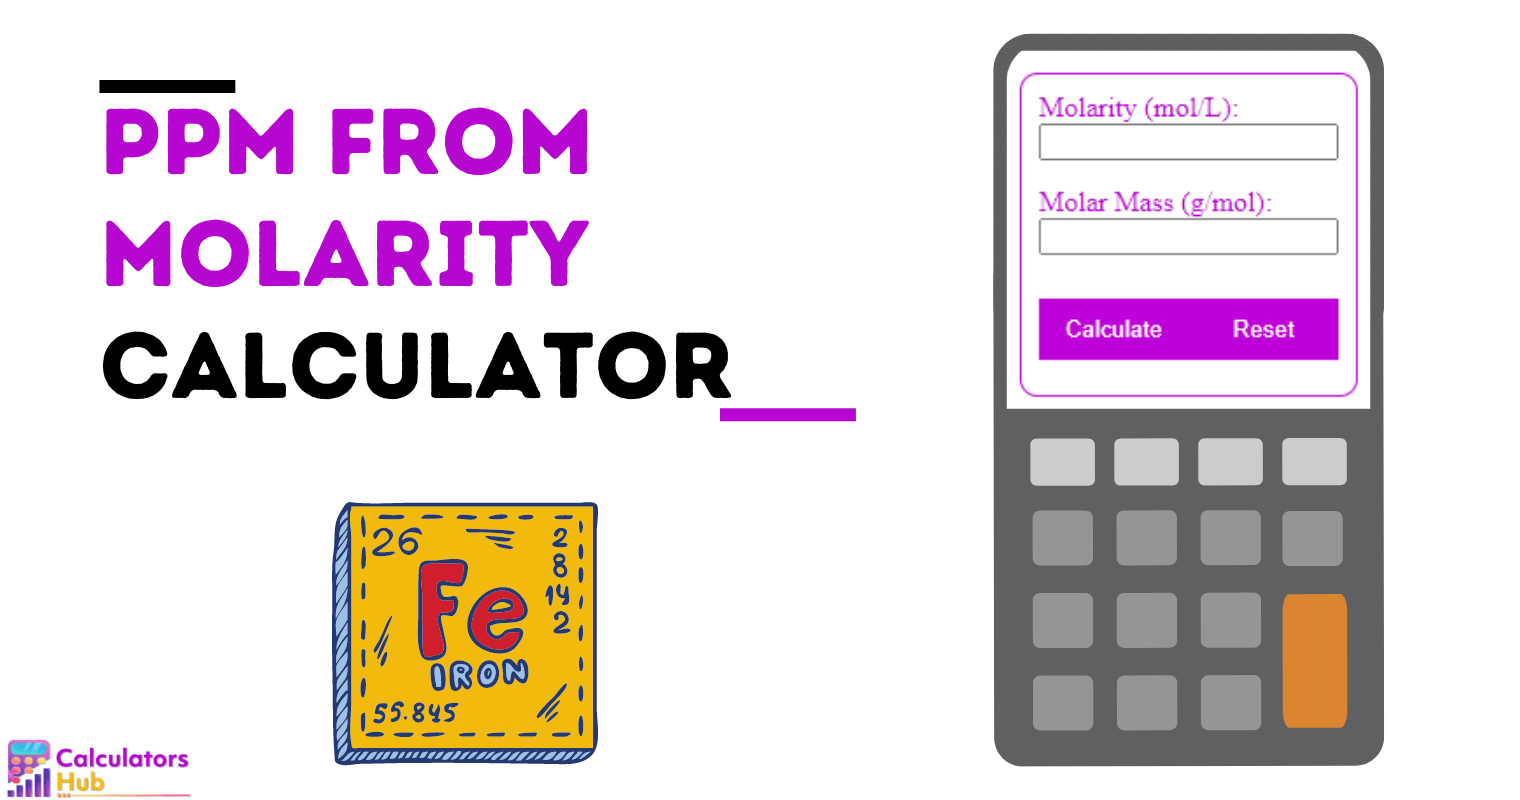 PPM from Molarity Calculator